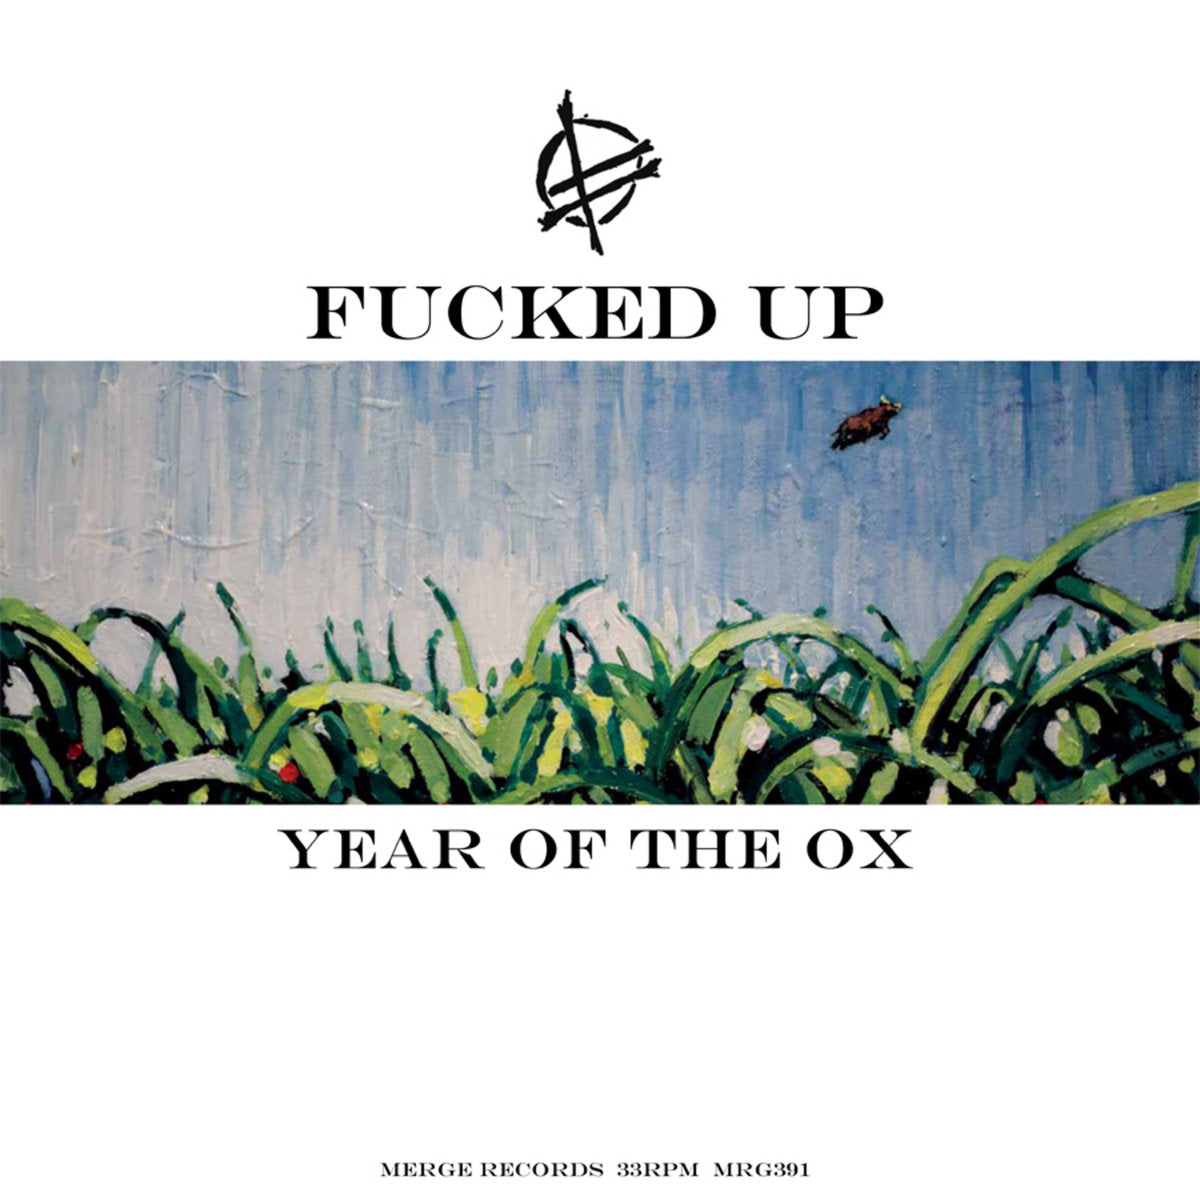 FUCKED UP "Year Of The Ox" LP